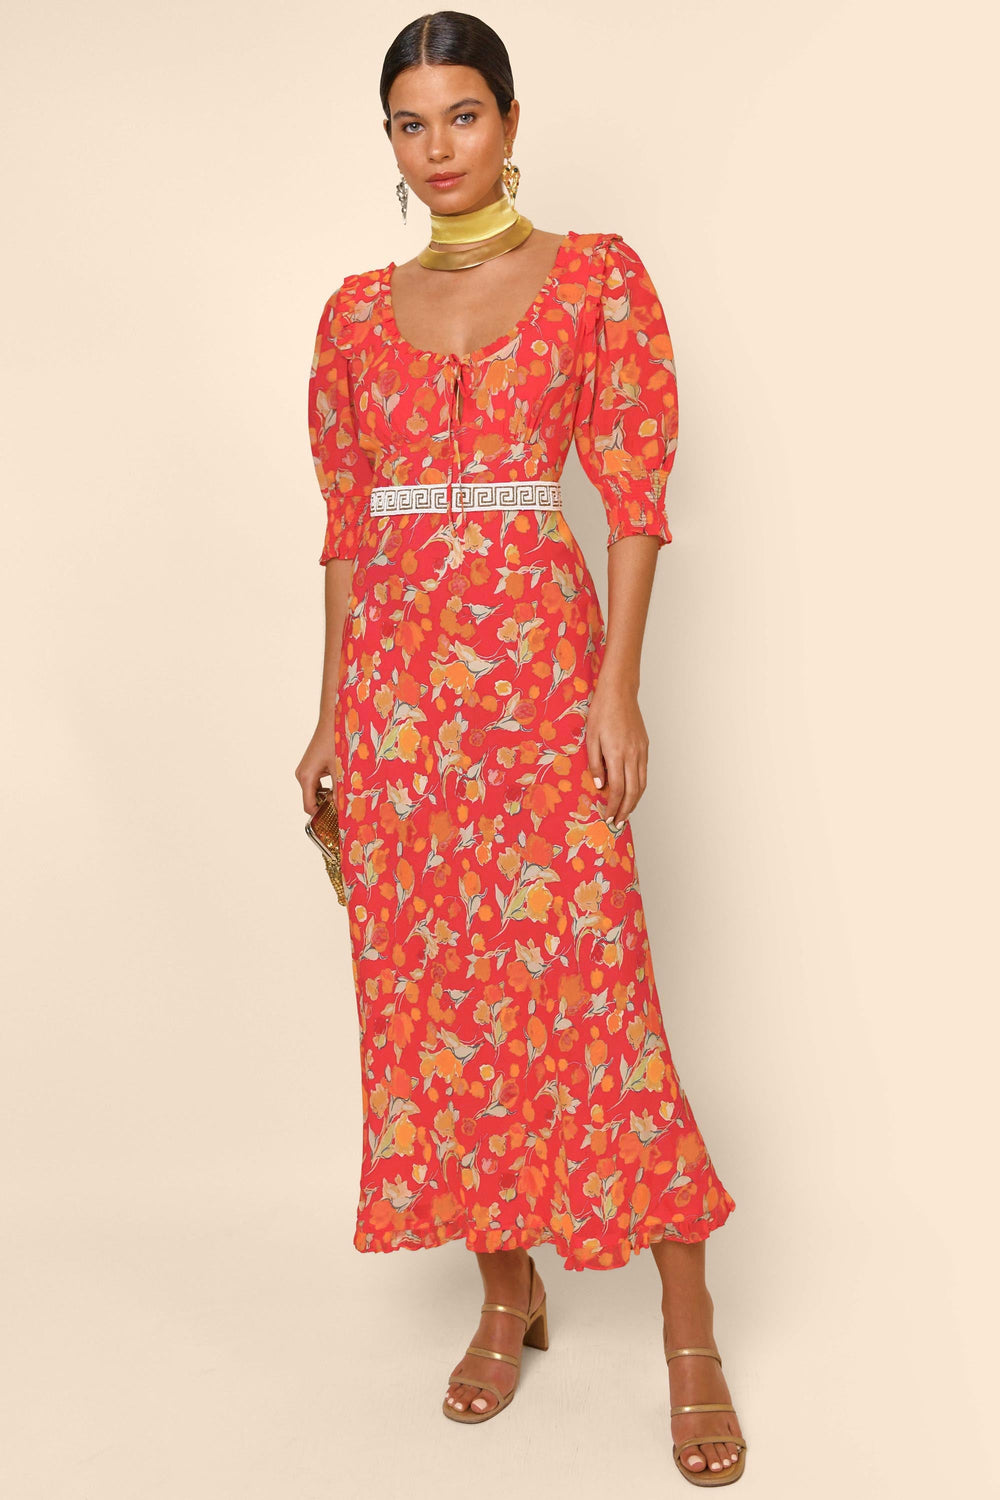 sathya - fontainhas floral coral – RIXO ⋆